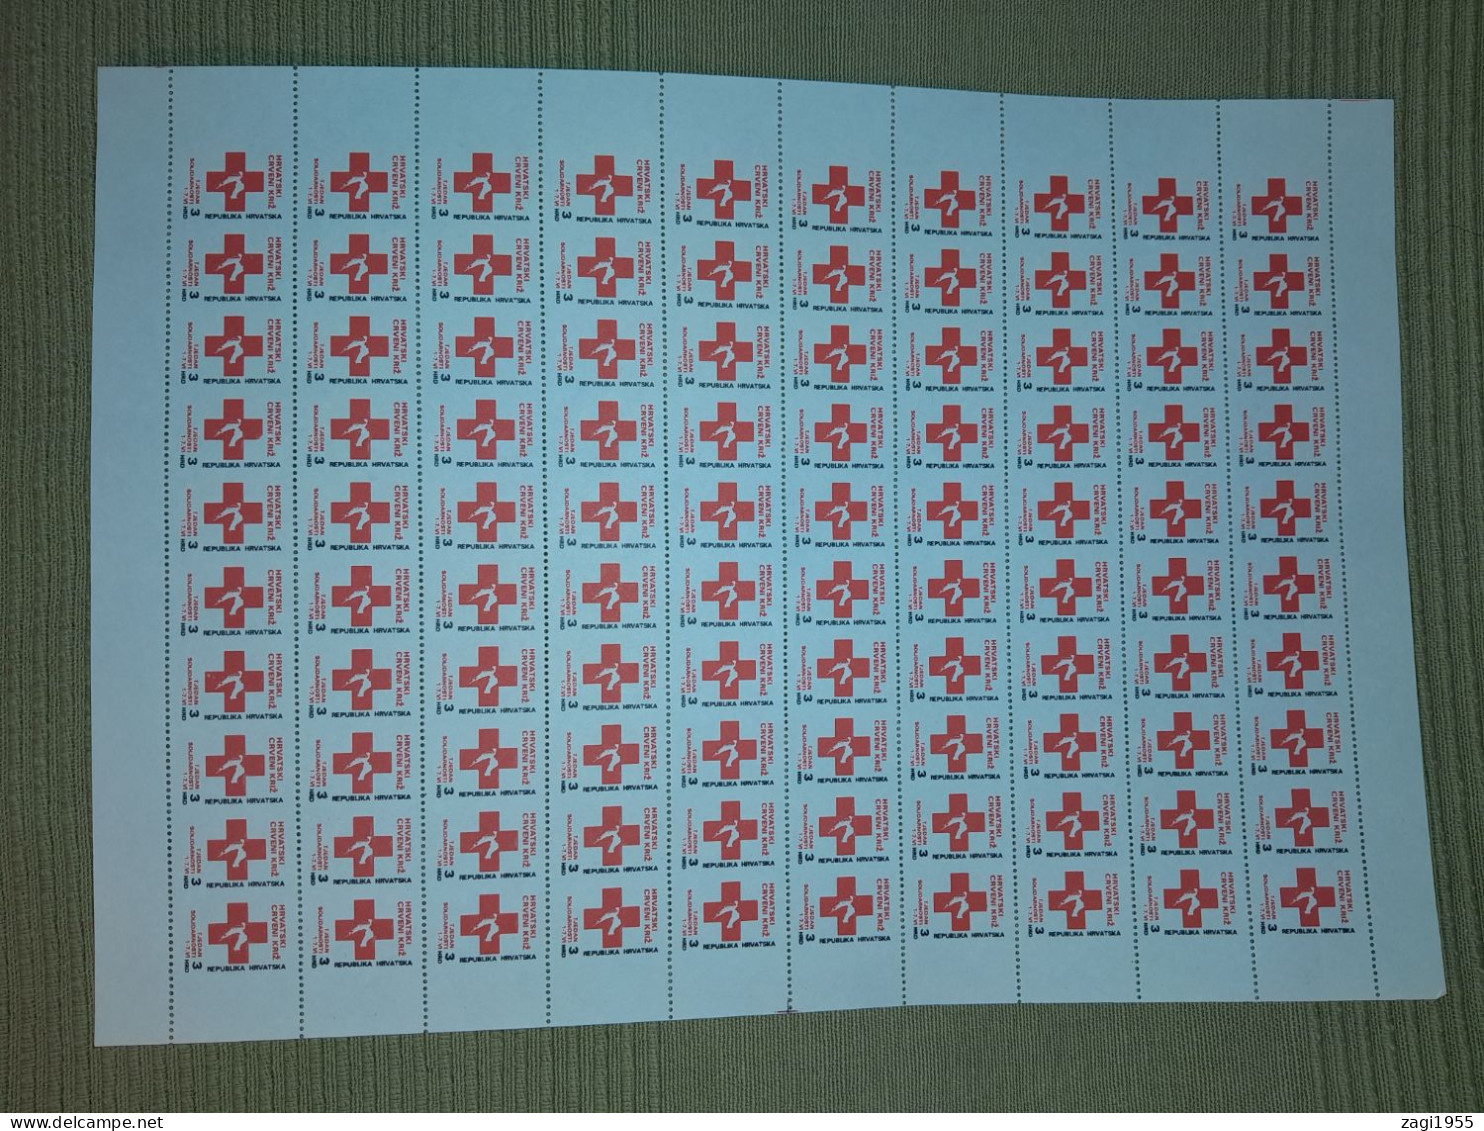 Croatia 1992 Sheet Red Cross Solidarity One Half IMPERFORATED, Perforated Only Horisontally - Croatia